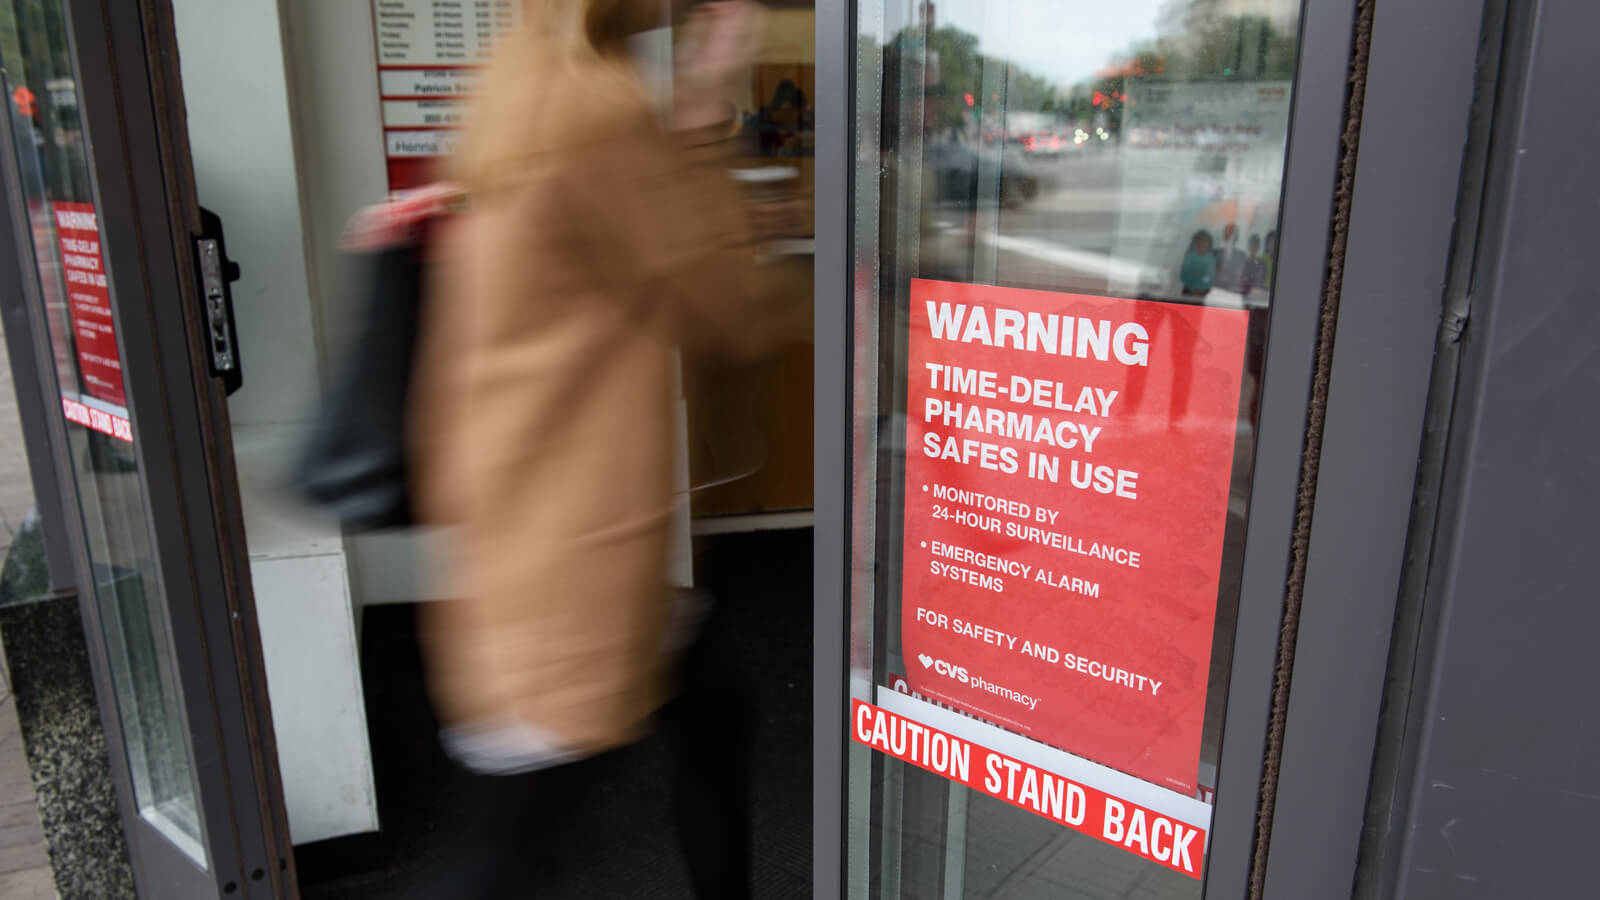 A woman enters a CVS Pharmacy location. A Sign on the door reads &quot;Warning: Time-Delay Pharmacy Safes In Use. Monitored by 24-Hour Surveillance. Emergency Alarm Systems. For Safety And Security. CVS Pharmacy&quot;